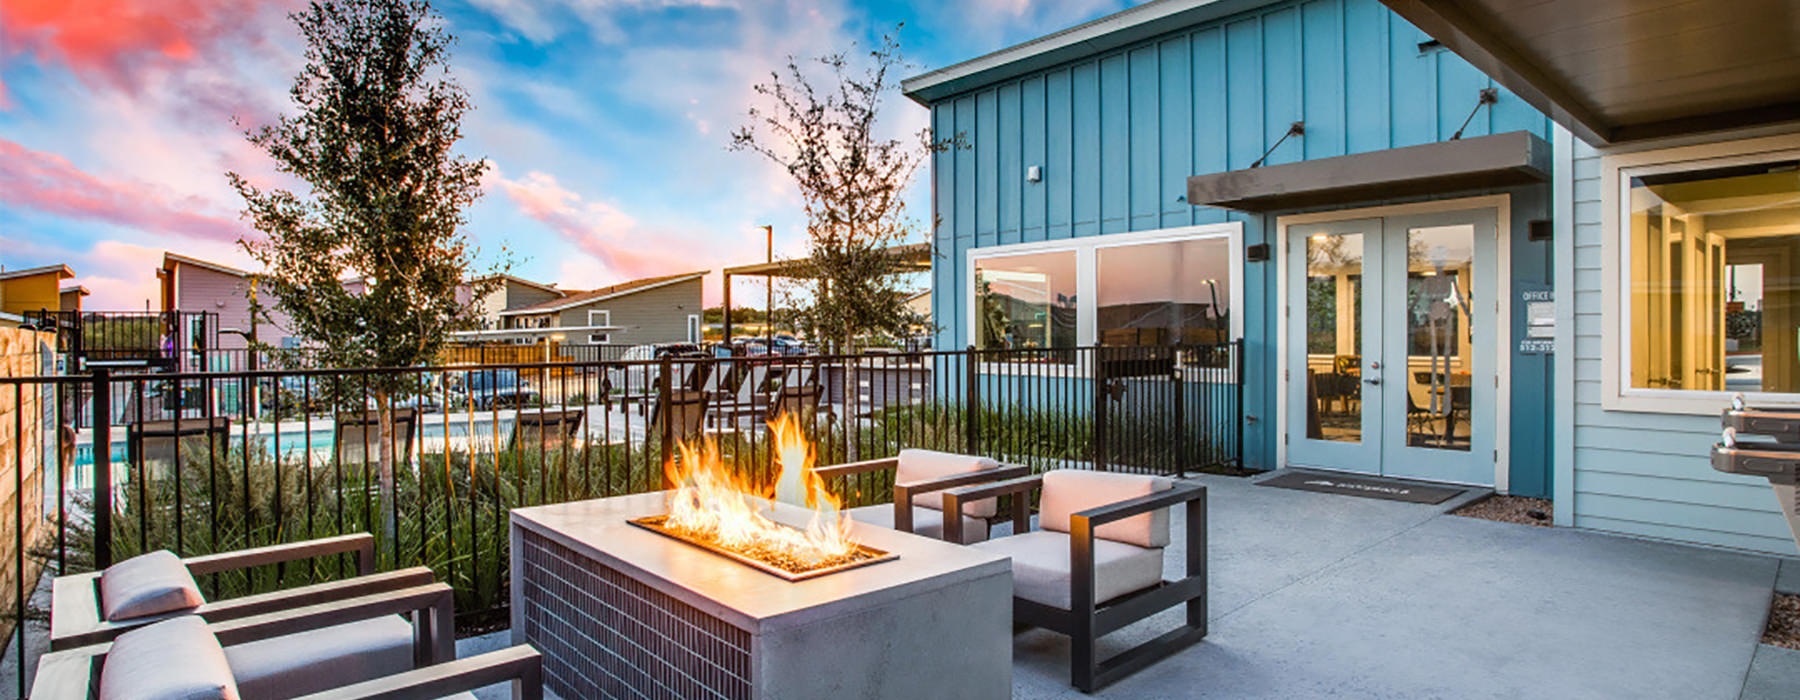 Firepit with lounge chair seating